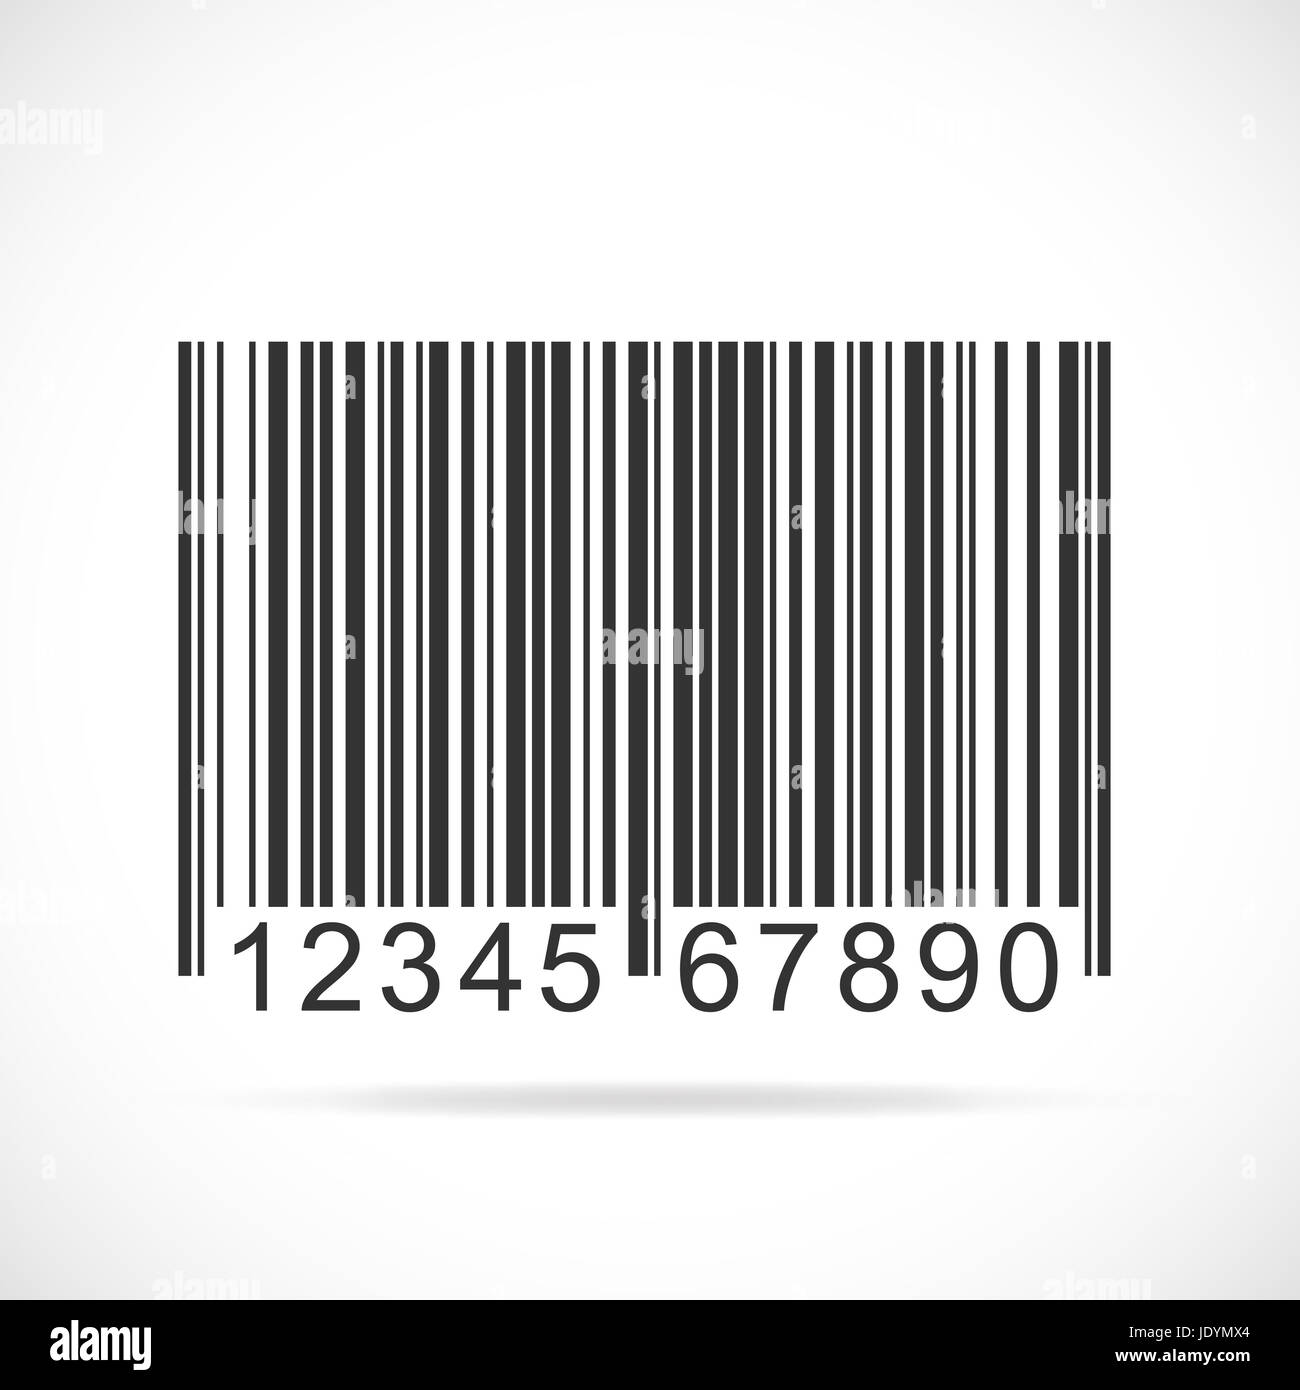 Illustration of a barcode isolated on a white background. Stock Photo